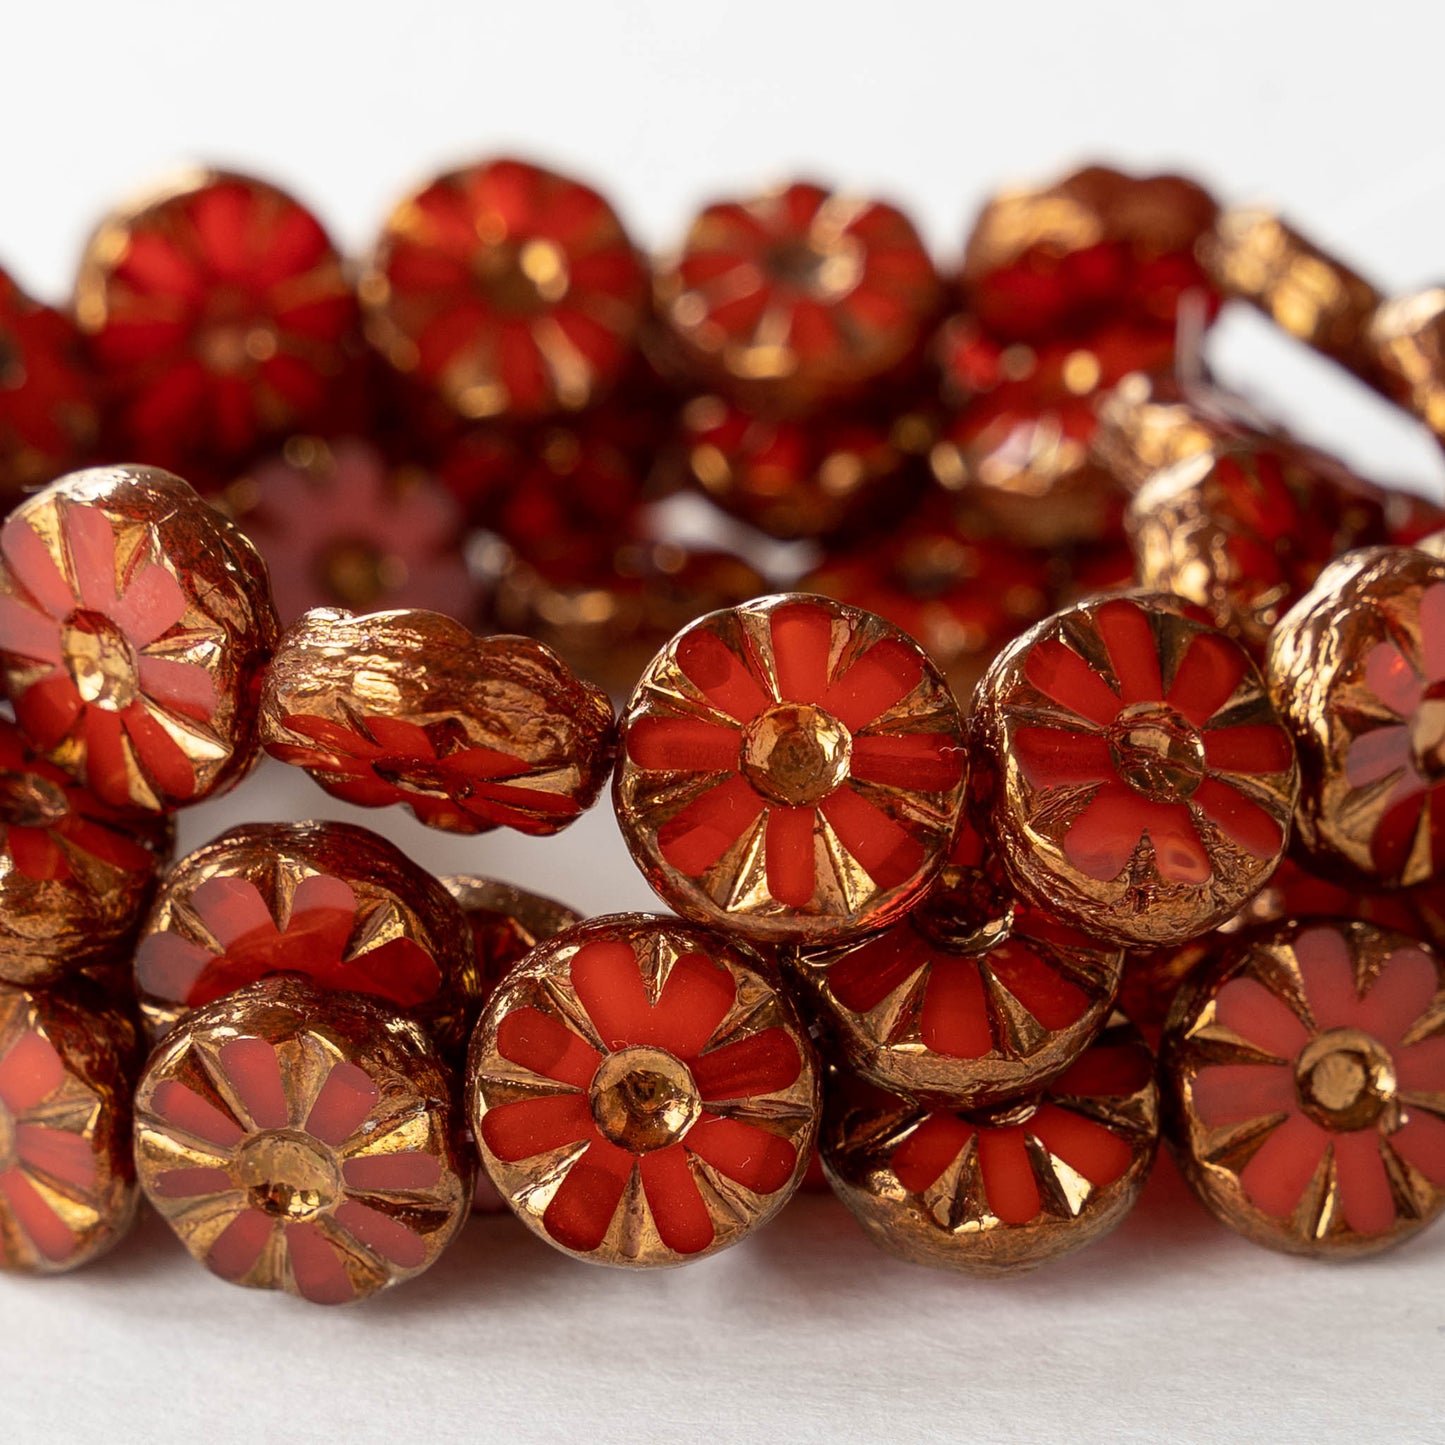 Load image into Gallery viewer, 12mm Sunflower Coin Beads - Red with Bronze Wash - 6 or 12 Beads
